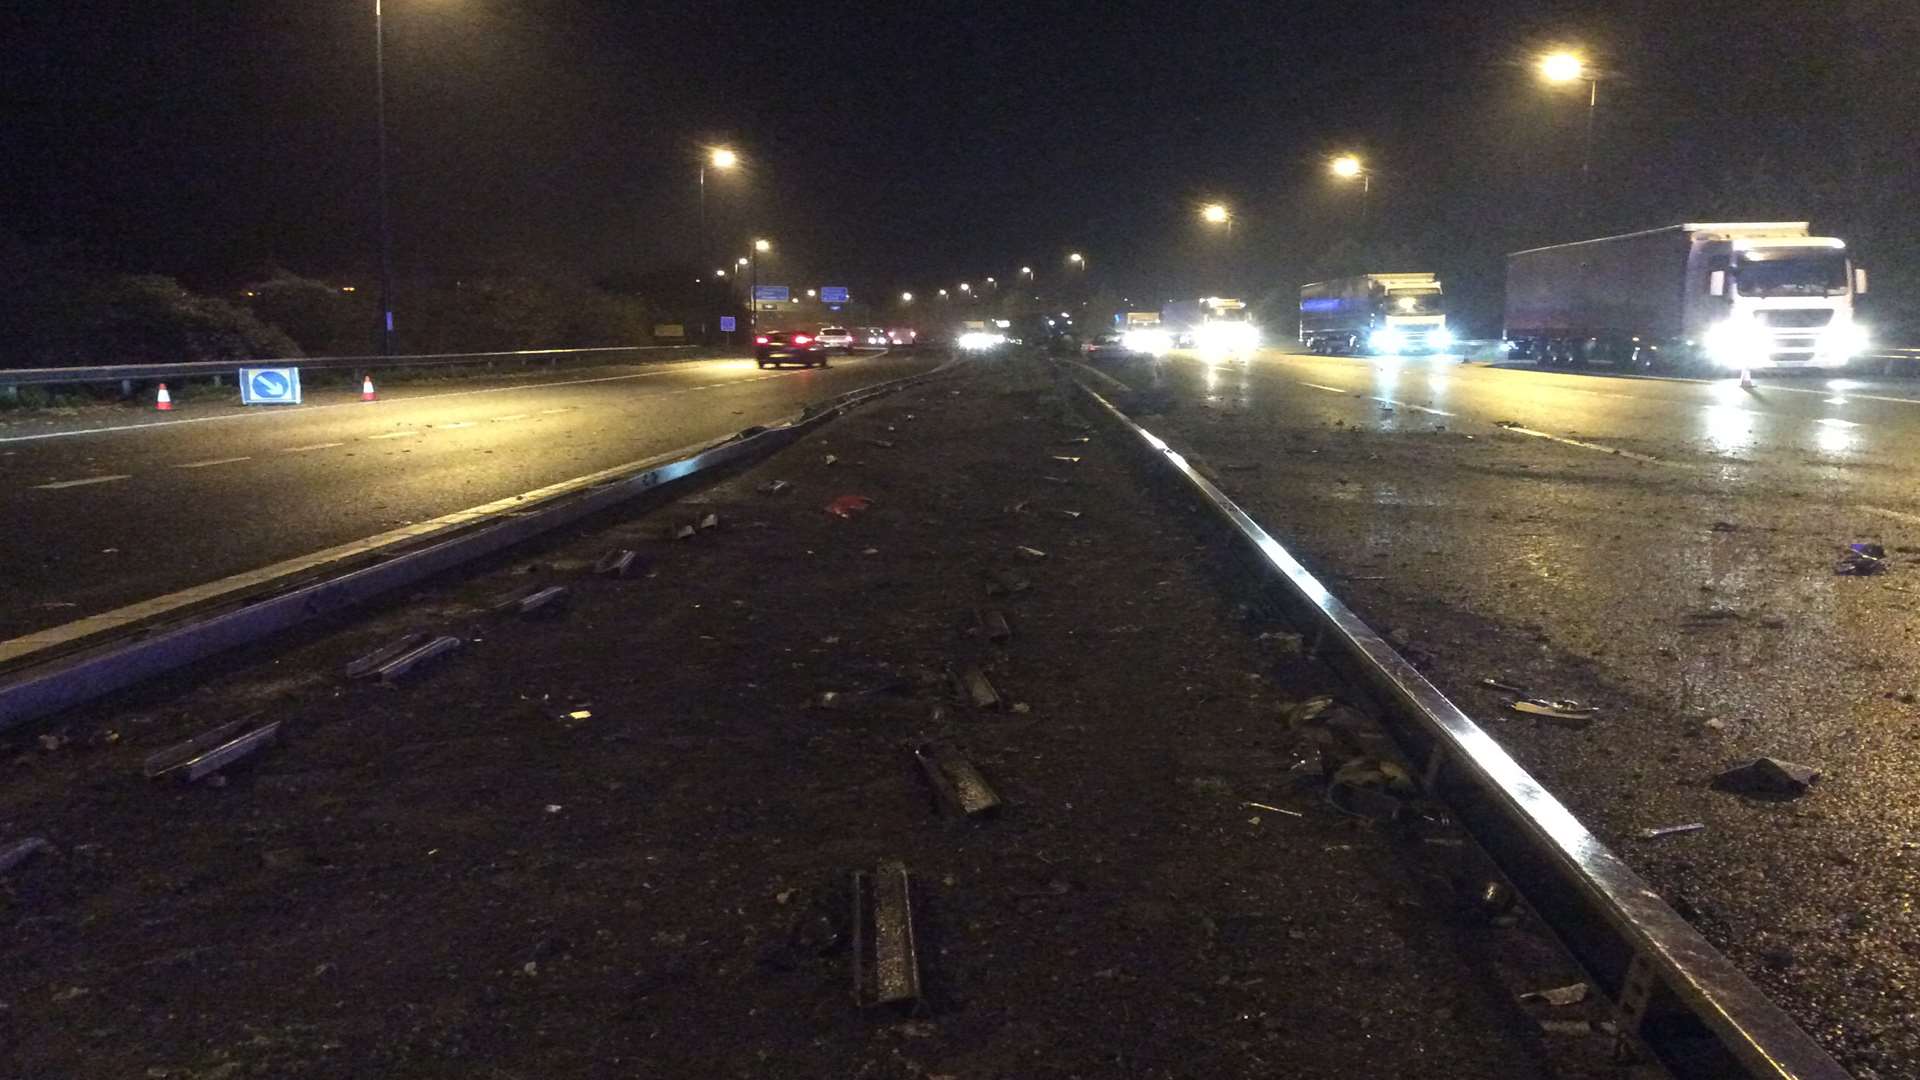 A massive stretch of the barrier was demolished in the crash. Picture: Highways Agency